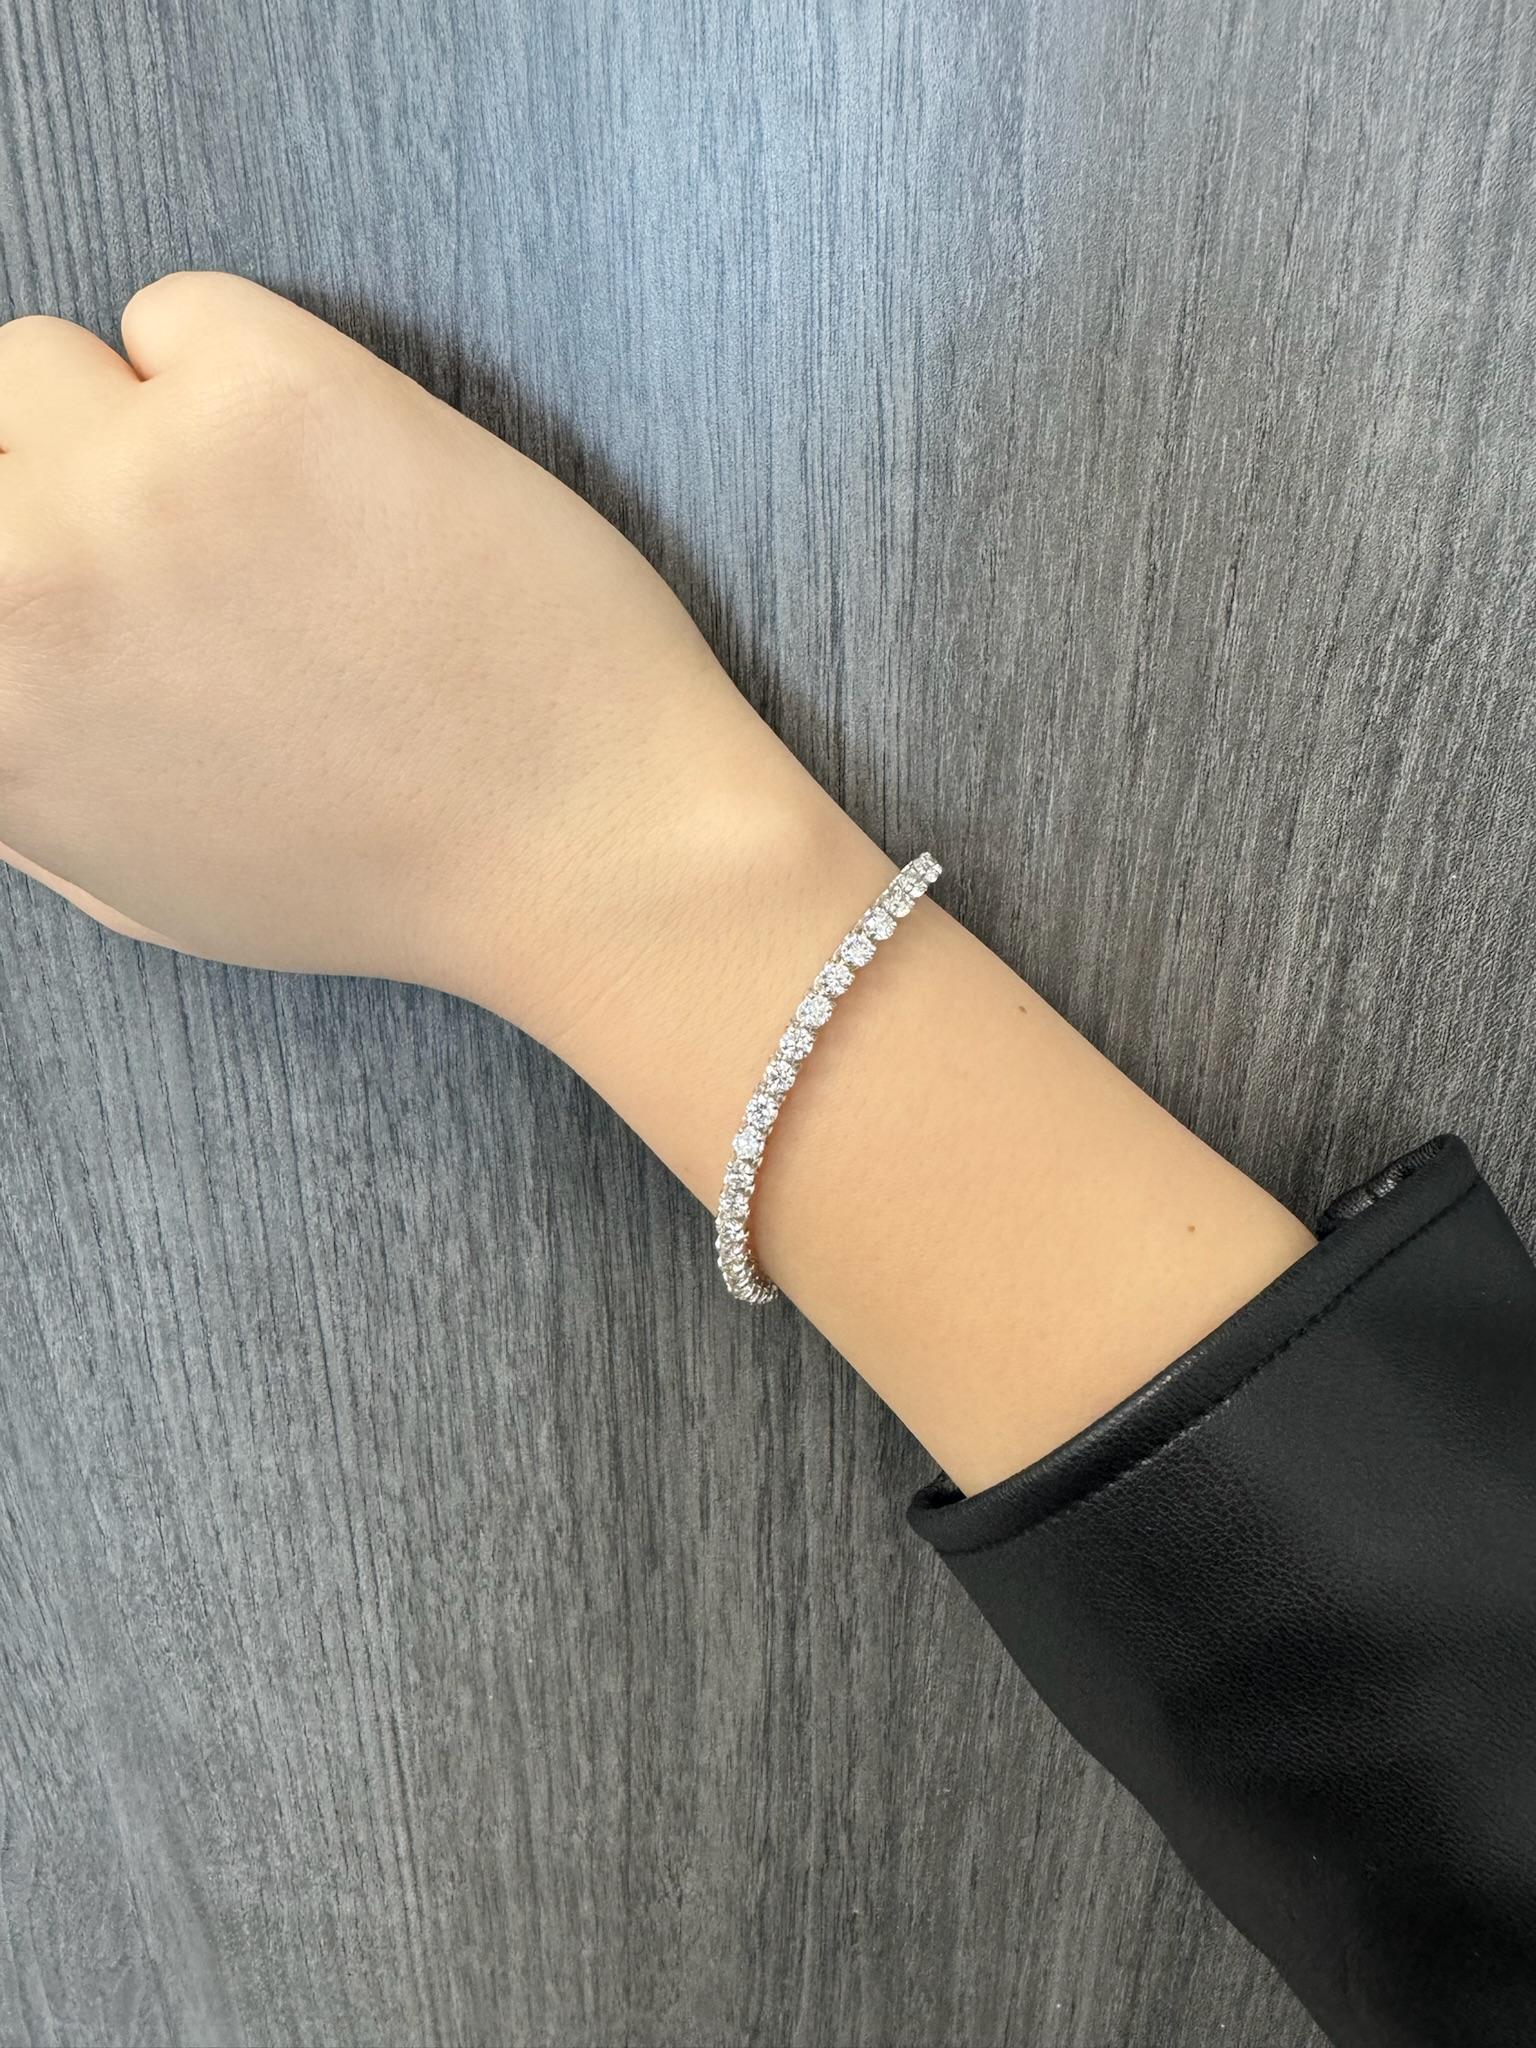 This elegant 3-Prong Diamond Tennis Bracelet features martini-style prongs, perfect for dainty stylists and classic looks. It radiates maximum brilliance and is perfect for stacking with other bracelets or worn alone.

Manufactured in Los Angeles